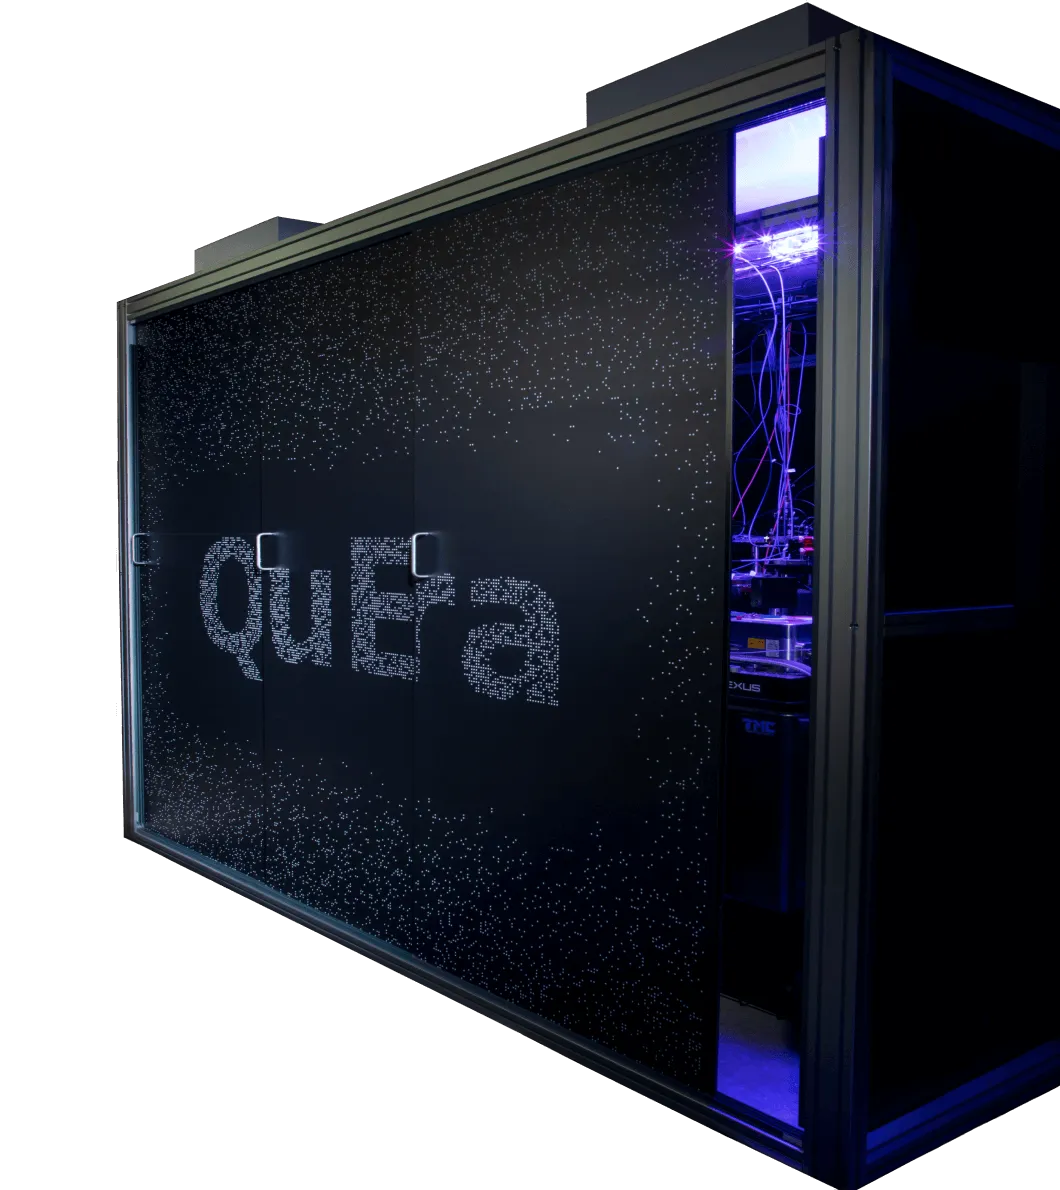 Quera To Construct World’S First Qubit Shuttling Testbed In Uk, Boosting Quantum Industry